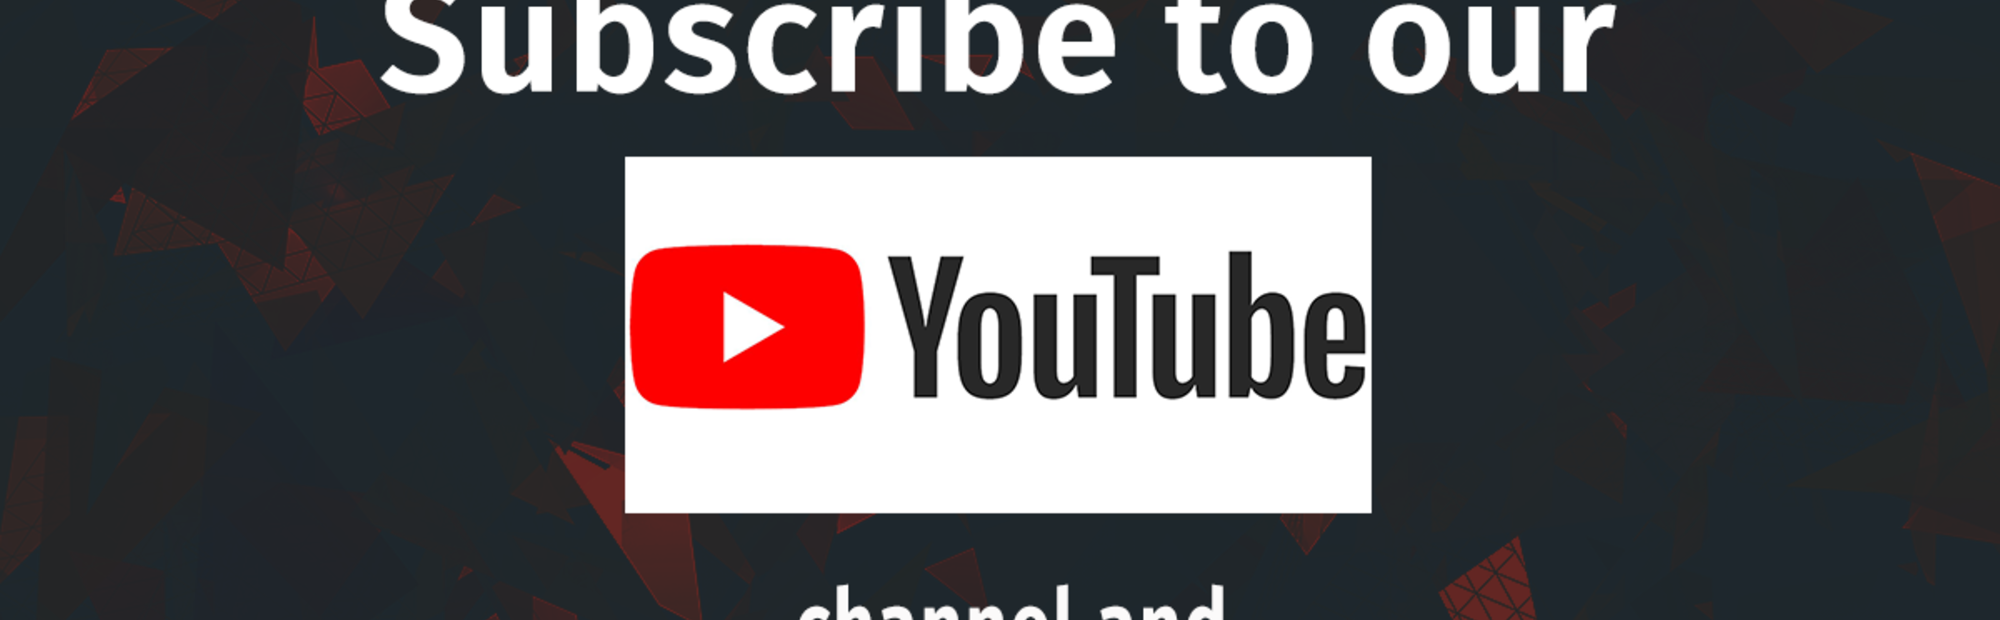 GRAPHIC SWING THE YOUTUBE LOGO